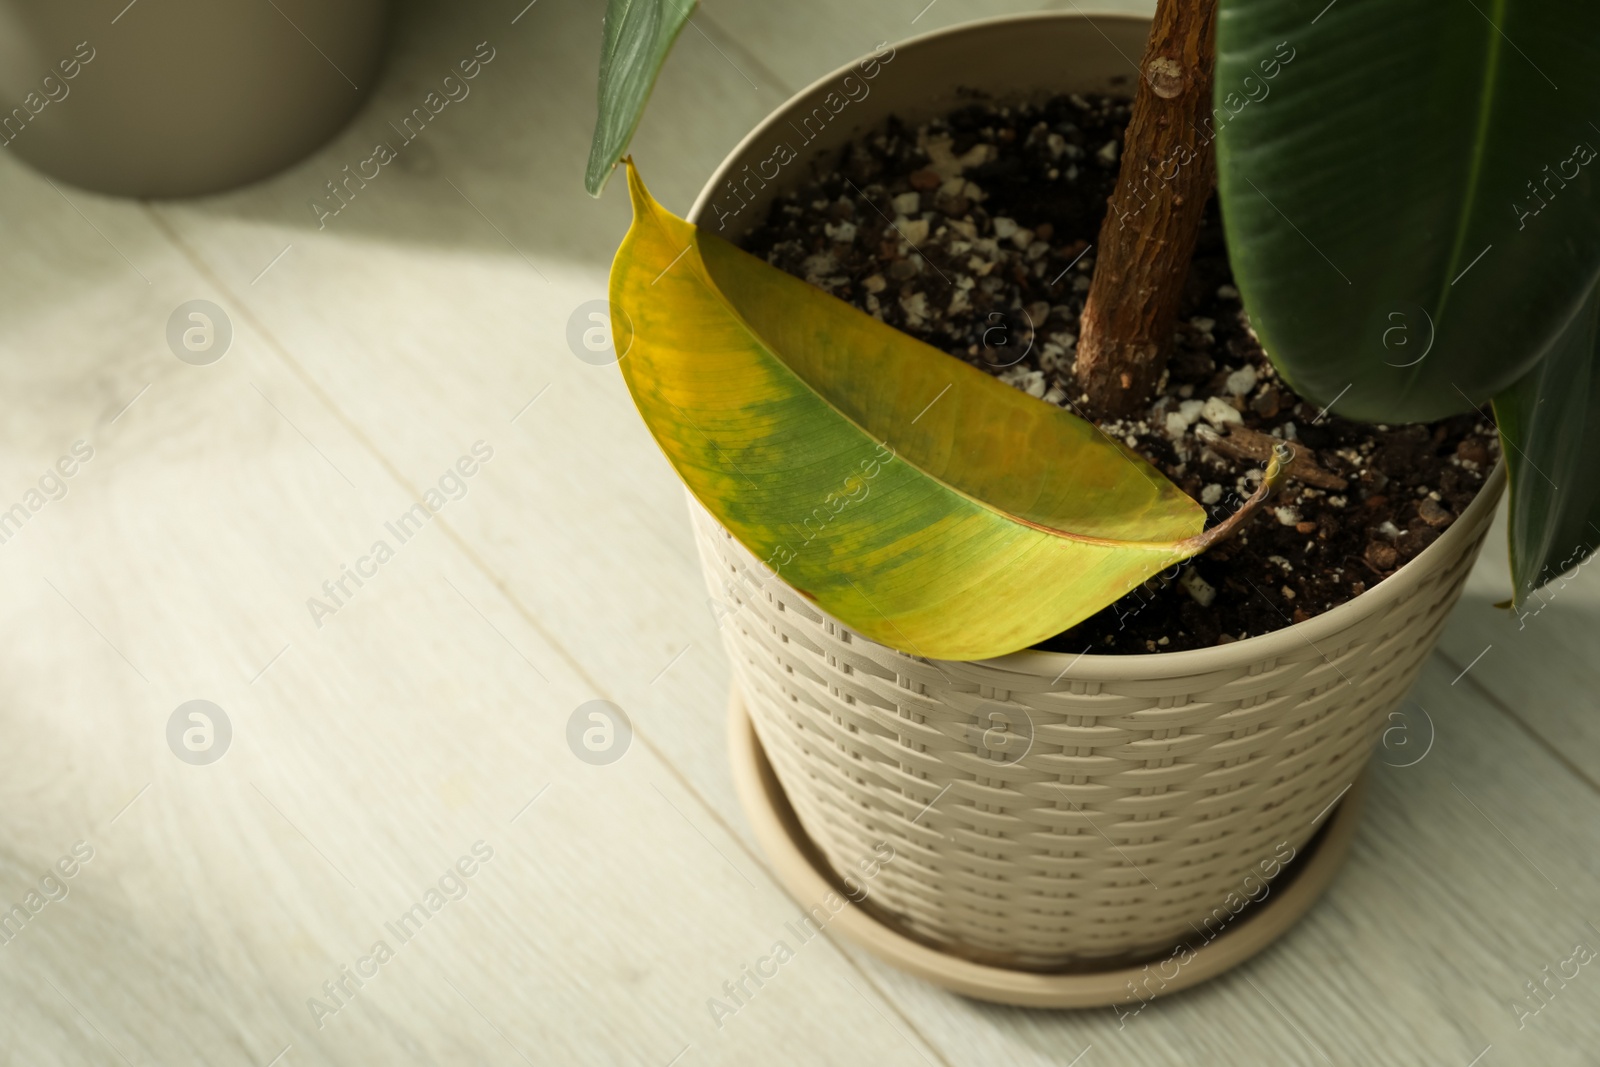 Photo of Fallen yellow leaf near potted houseplant indoors. Space for text